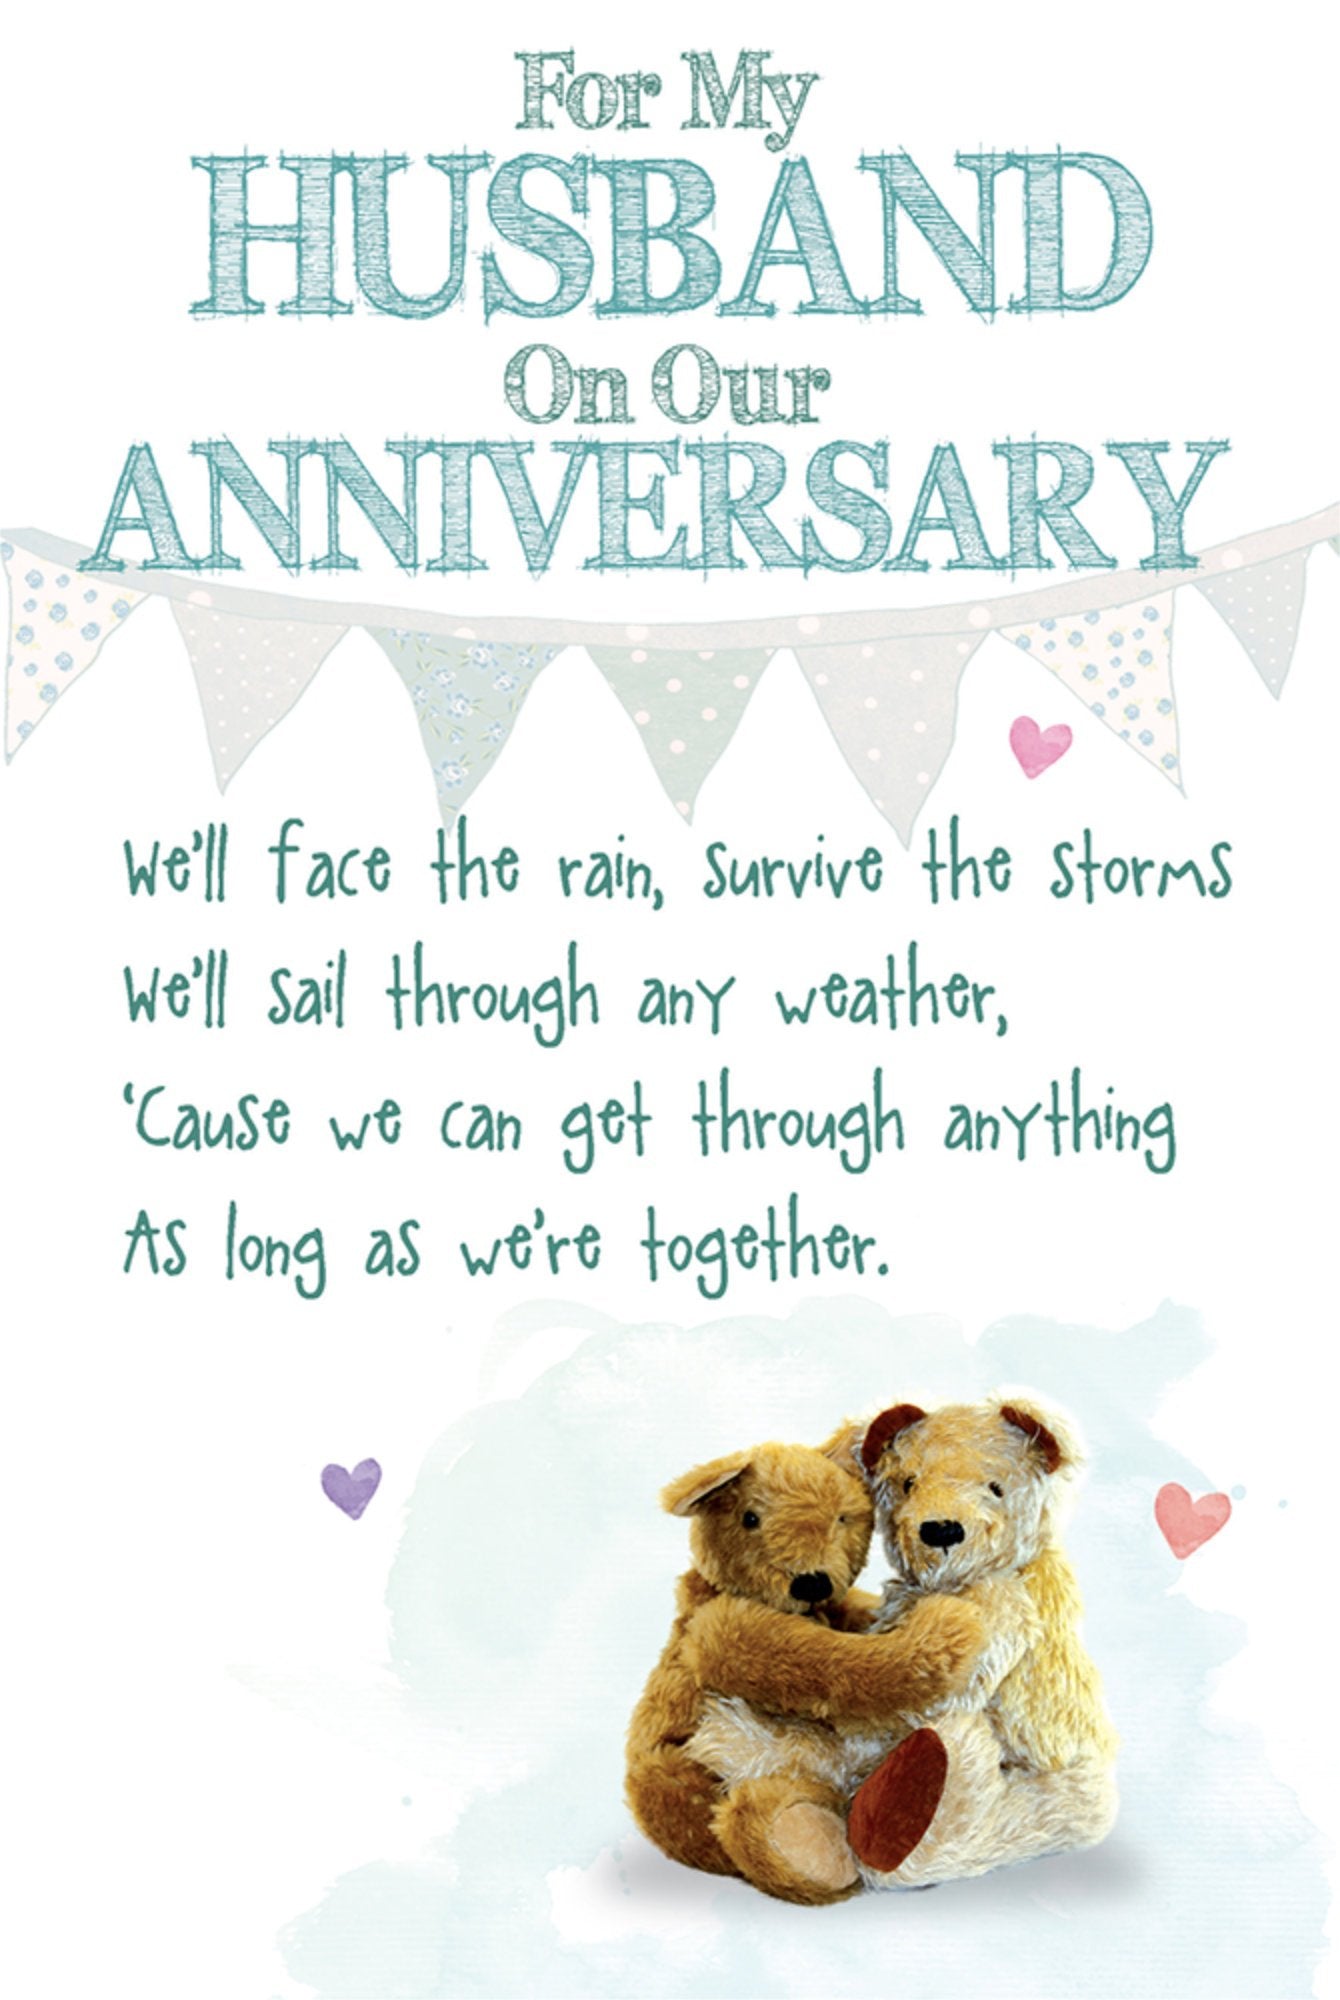 Photograph of Storms Husband Funny Anniversary Greetings Card at Nicole's Shop